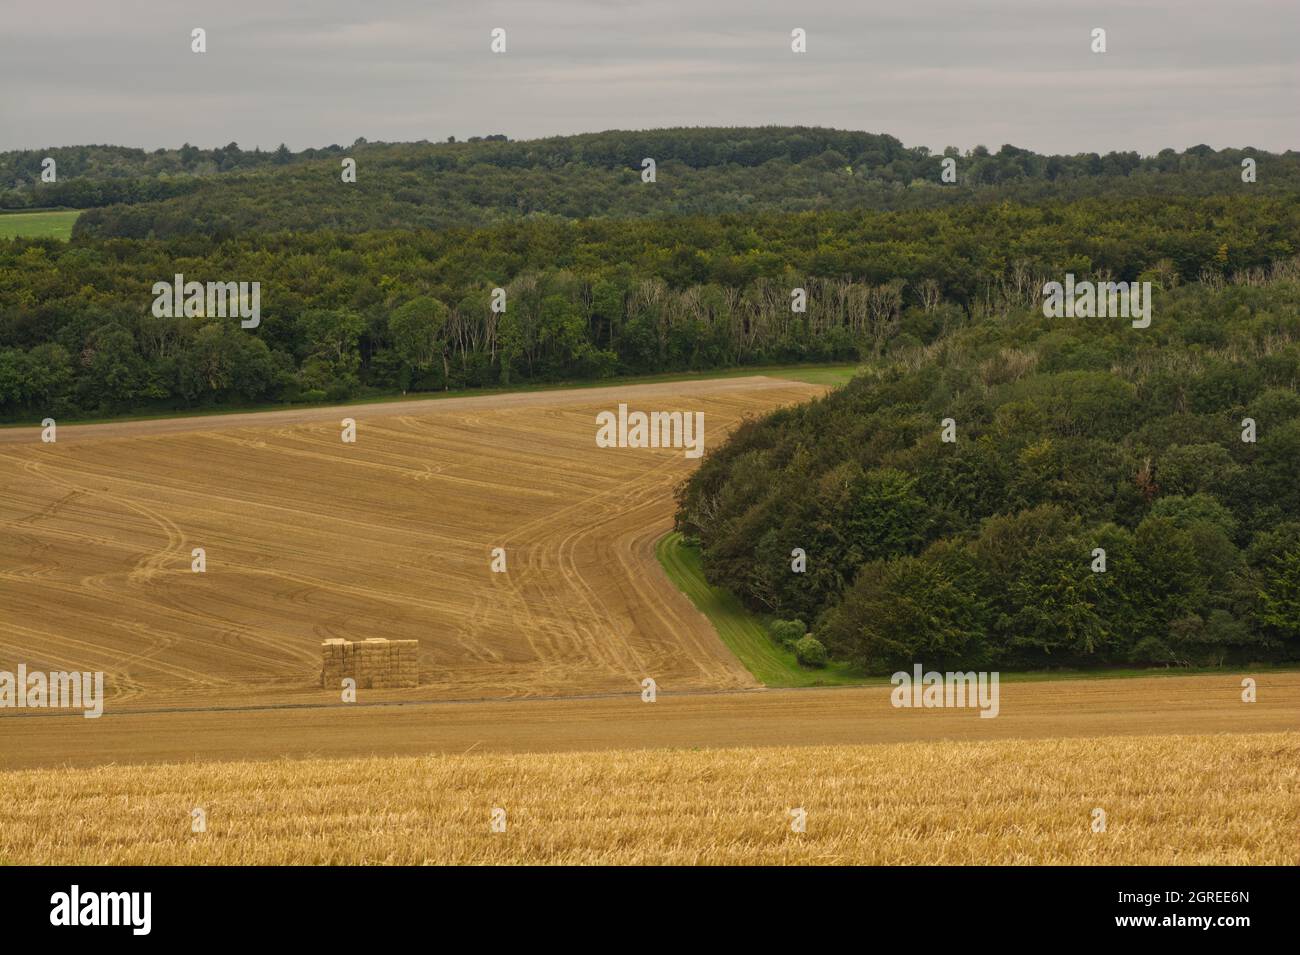 Countryside at Halnaker near Chichester on South Downs in West Sussex, England. With harvested cornfield. Stock Photo